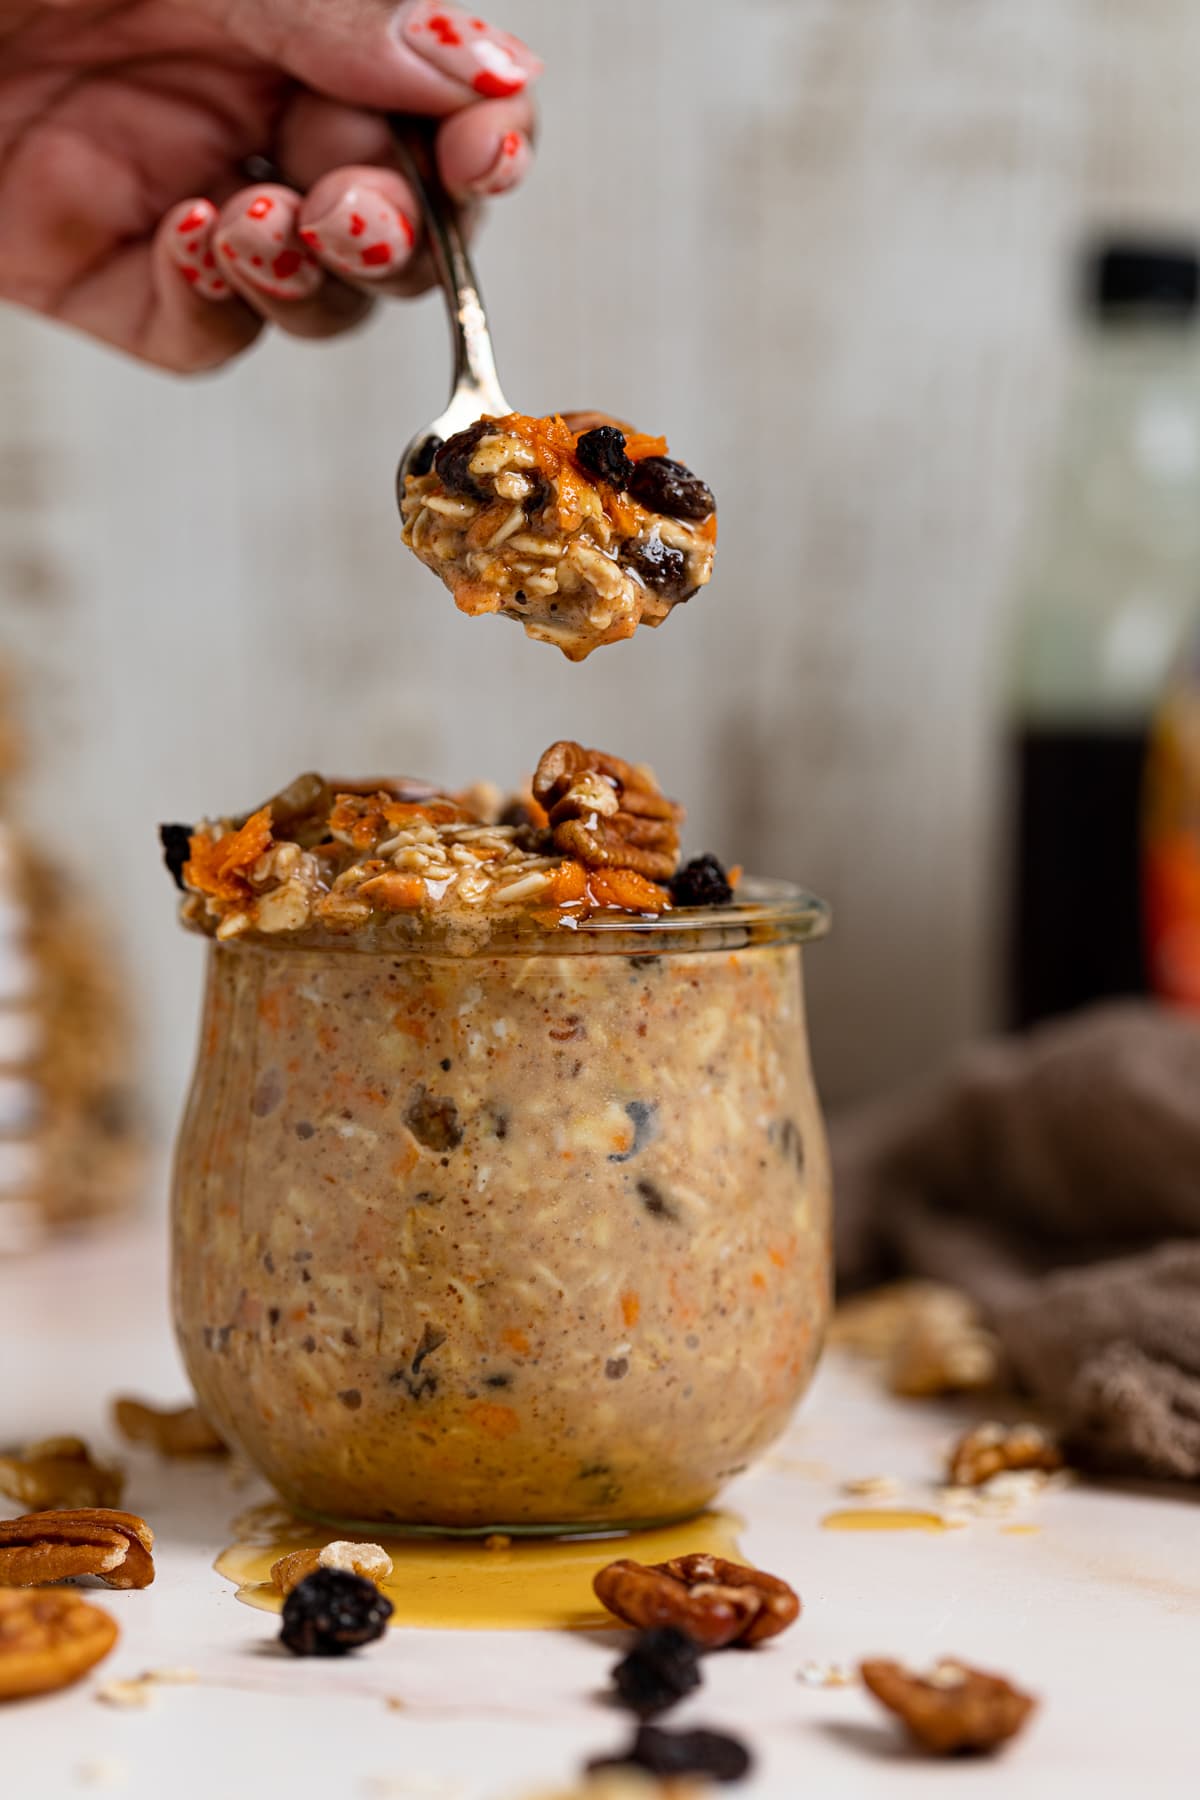 Spoon with a scoop of Spiced Carrot Cake Overnight Oats